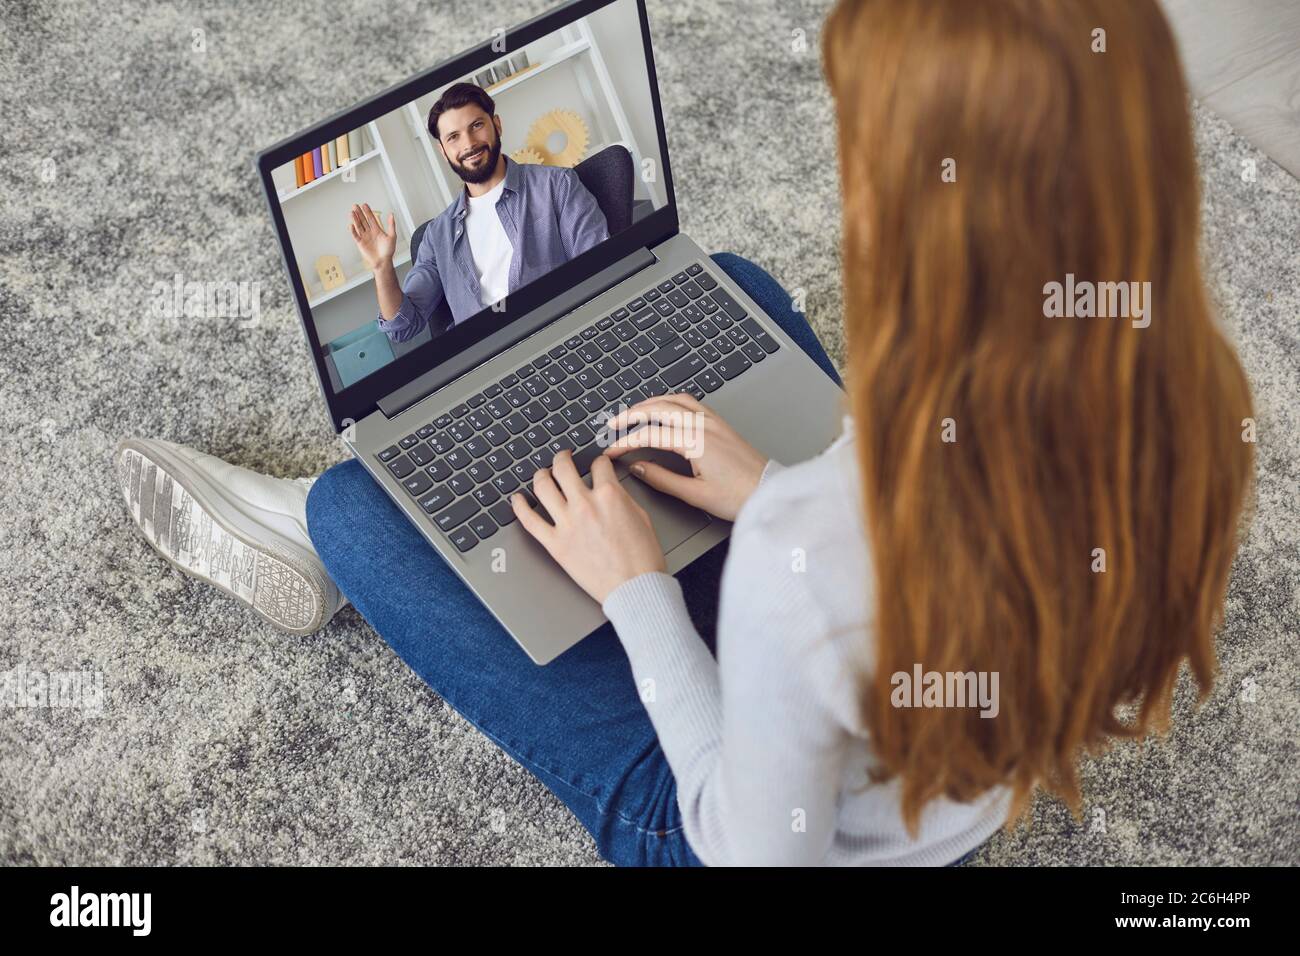 Online chat. The girl has a video call laptop with a man sitting at home. Stock Photo